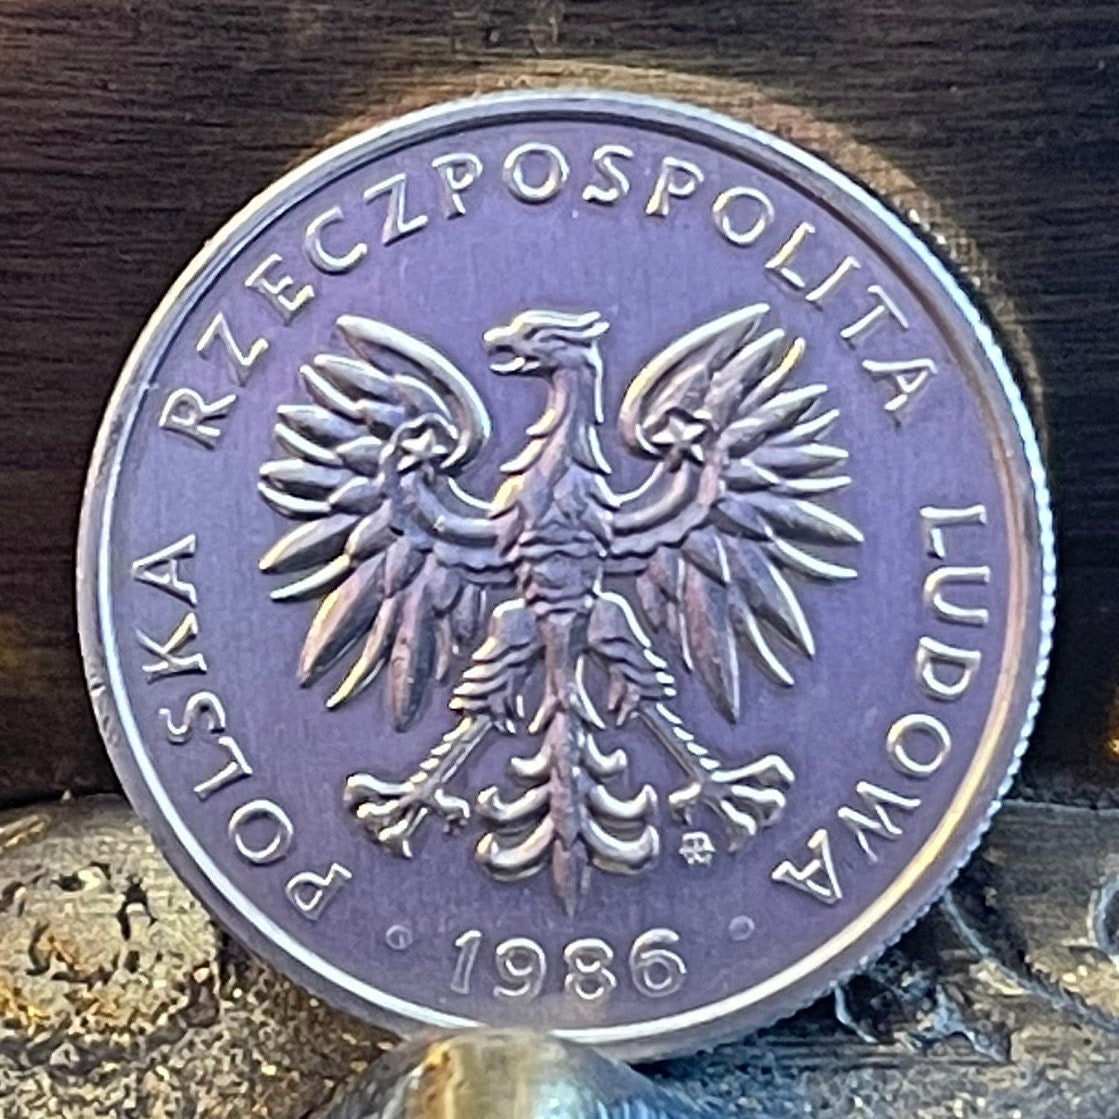 White Eagle 50 Groszy Poland Authentic Coin Money for Jewelry and Craft Making